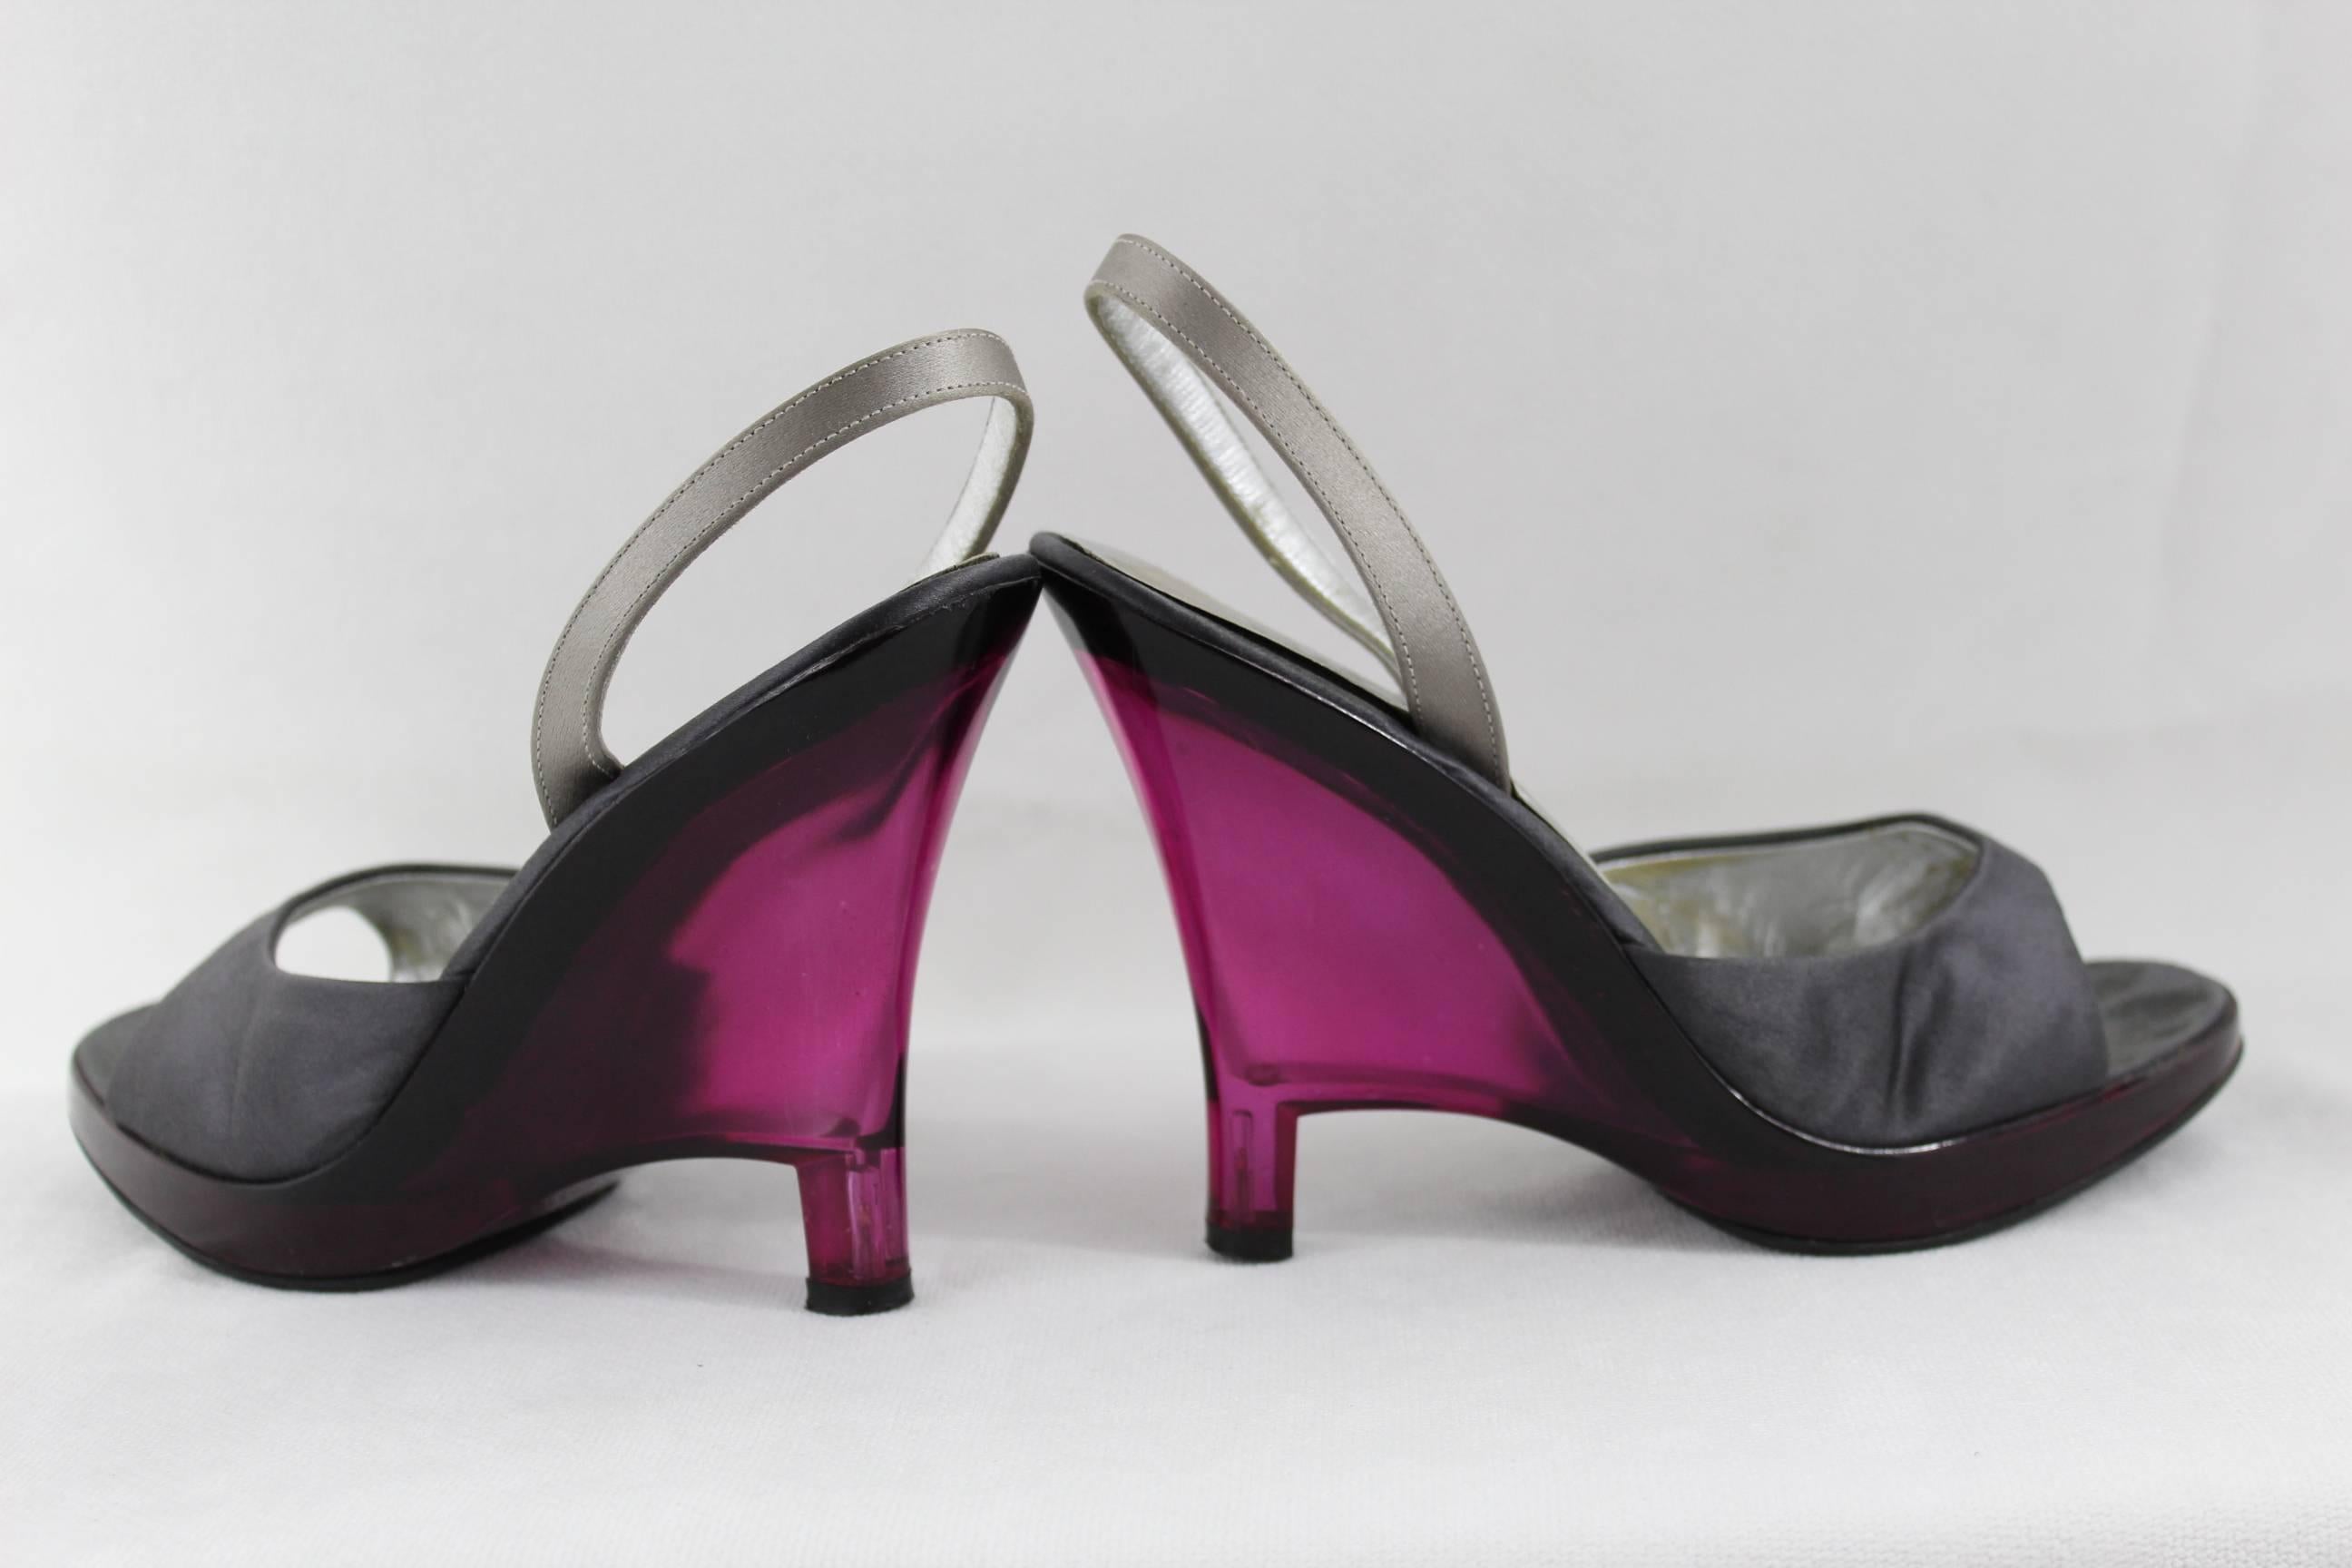 Chaussures vintage Prada in fair condition.

Awesome violet heel in plexy.

Shoes have been worn.